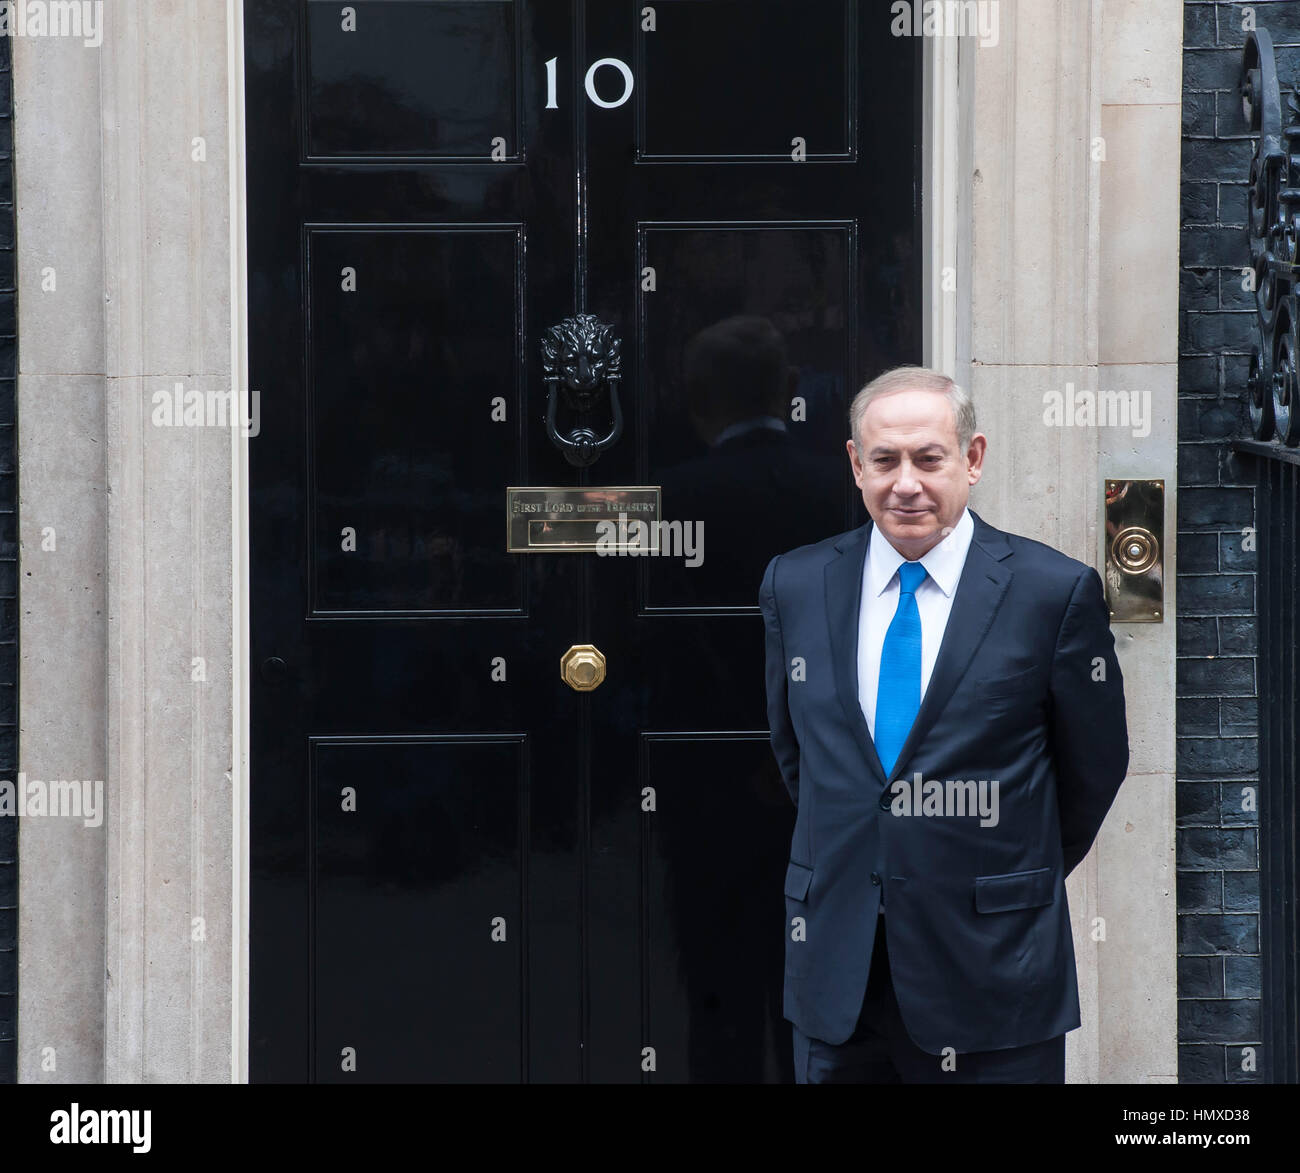 London, UK. 6th February 2017. The Israeli Prime Minister Benjamin Netanyahu is greeted by British Prime Minister Theresa May to Downing Street. Netanyahu’s visit comes amid tensions between UK and EU over Israel. Credit: Michael Tubi/Alamy Live News Stock Photo